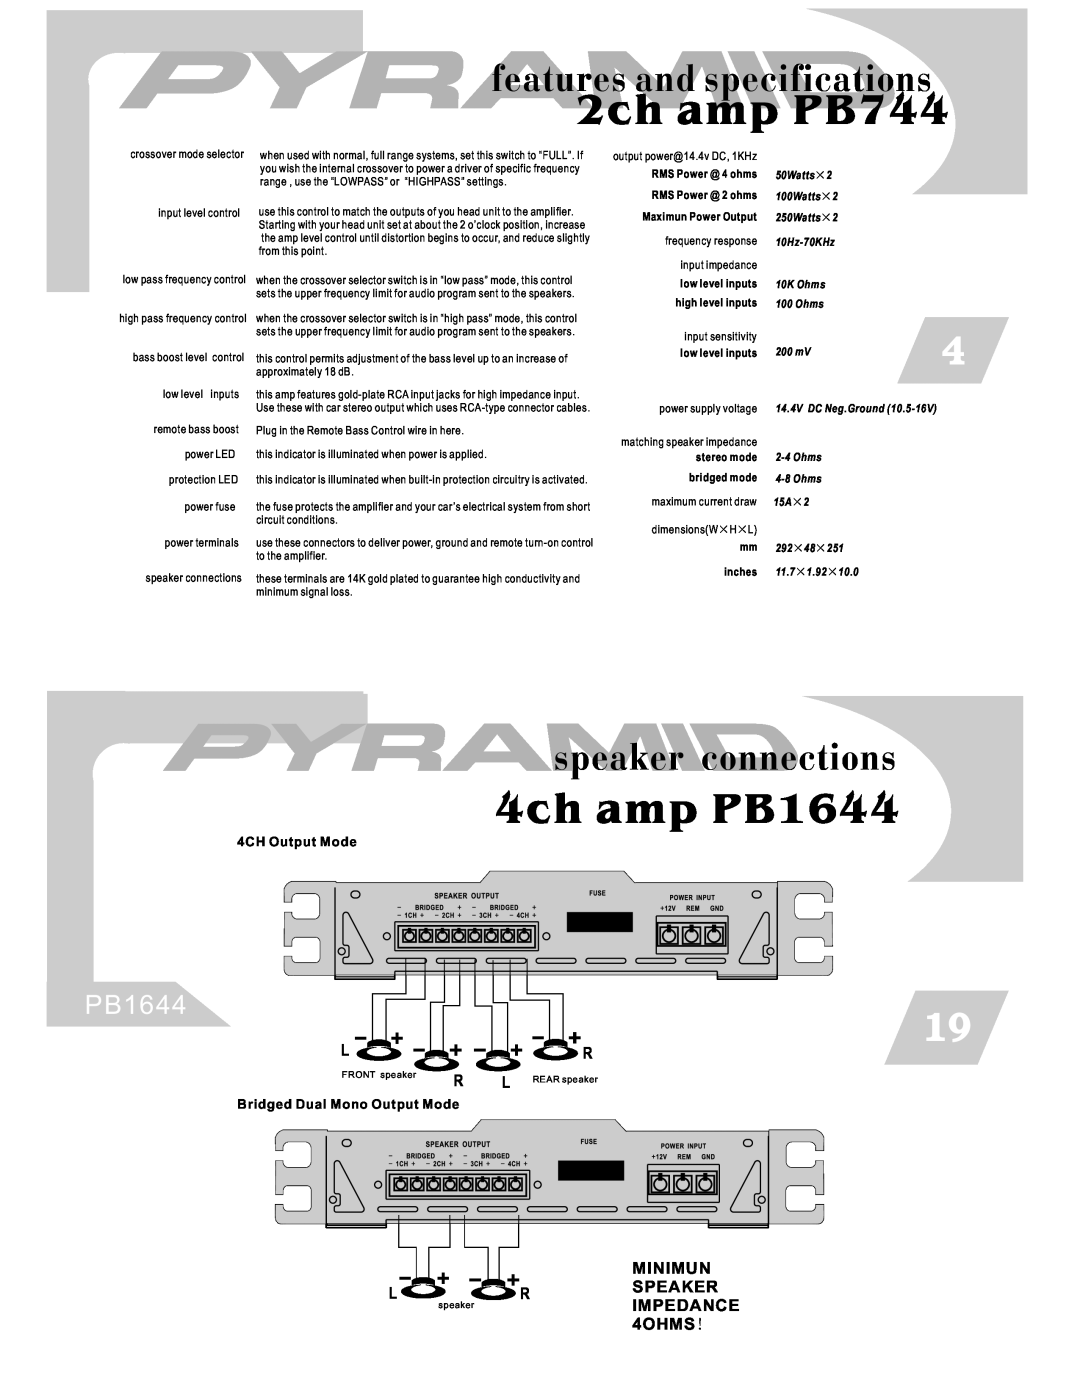 Pyramid Car Audio 2ch amp PB744, 4ch amp PB1644, features and specifications, speaker connections, 4CH Output Mode 